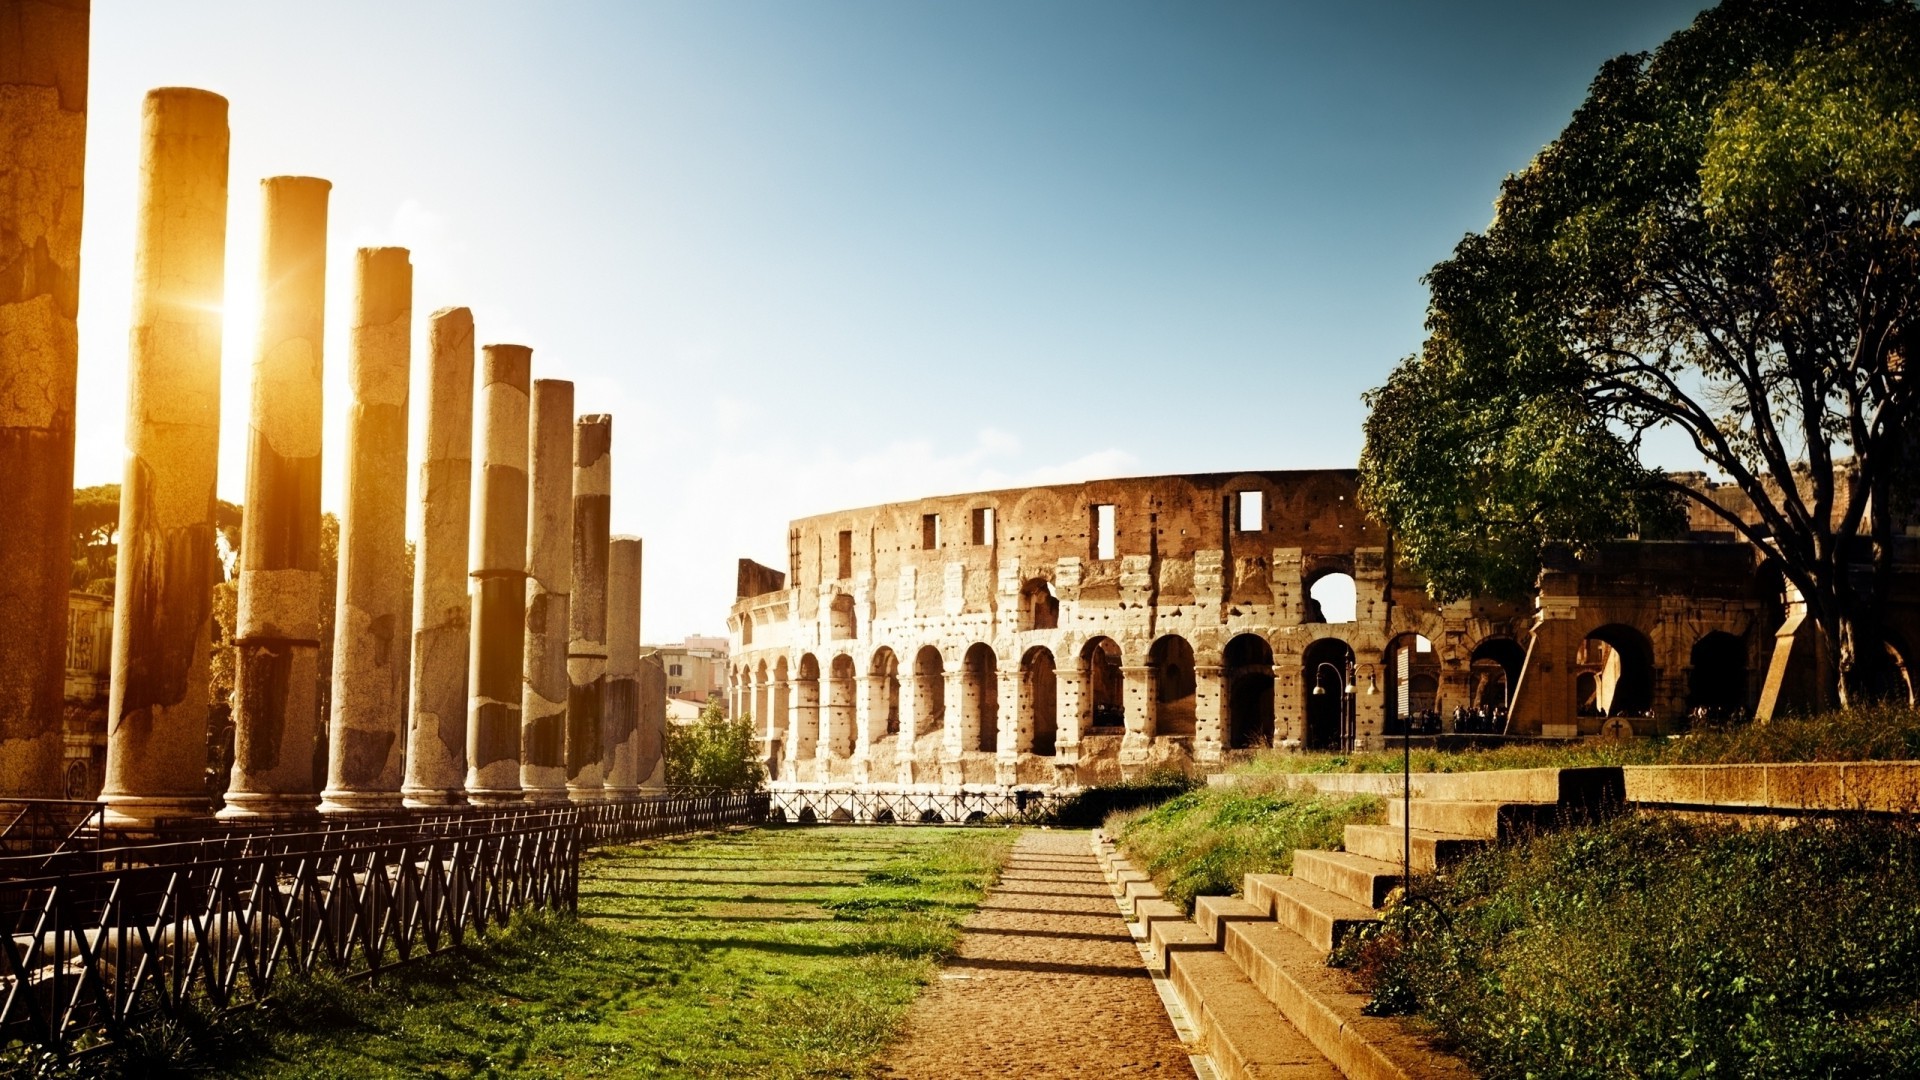 architecture, Nature, Trees, Sun, Pillar, Stone, Colosseum, Rome, Italy, Capital, Stairs, Sunlight, Path, Field, Grass, Arena, Arch, Building, Monuments Wallpaper